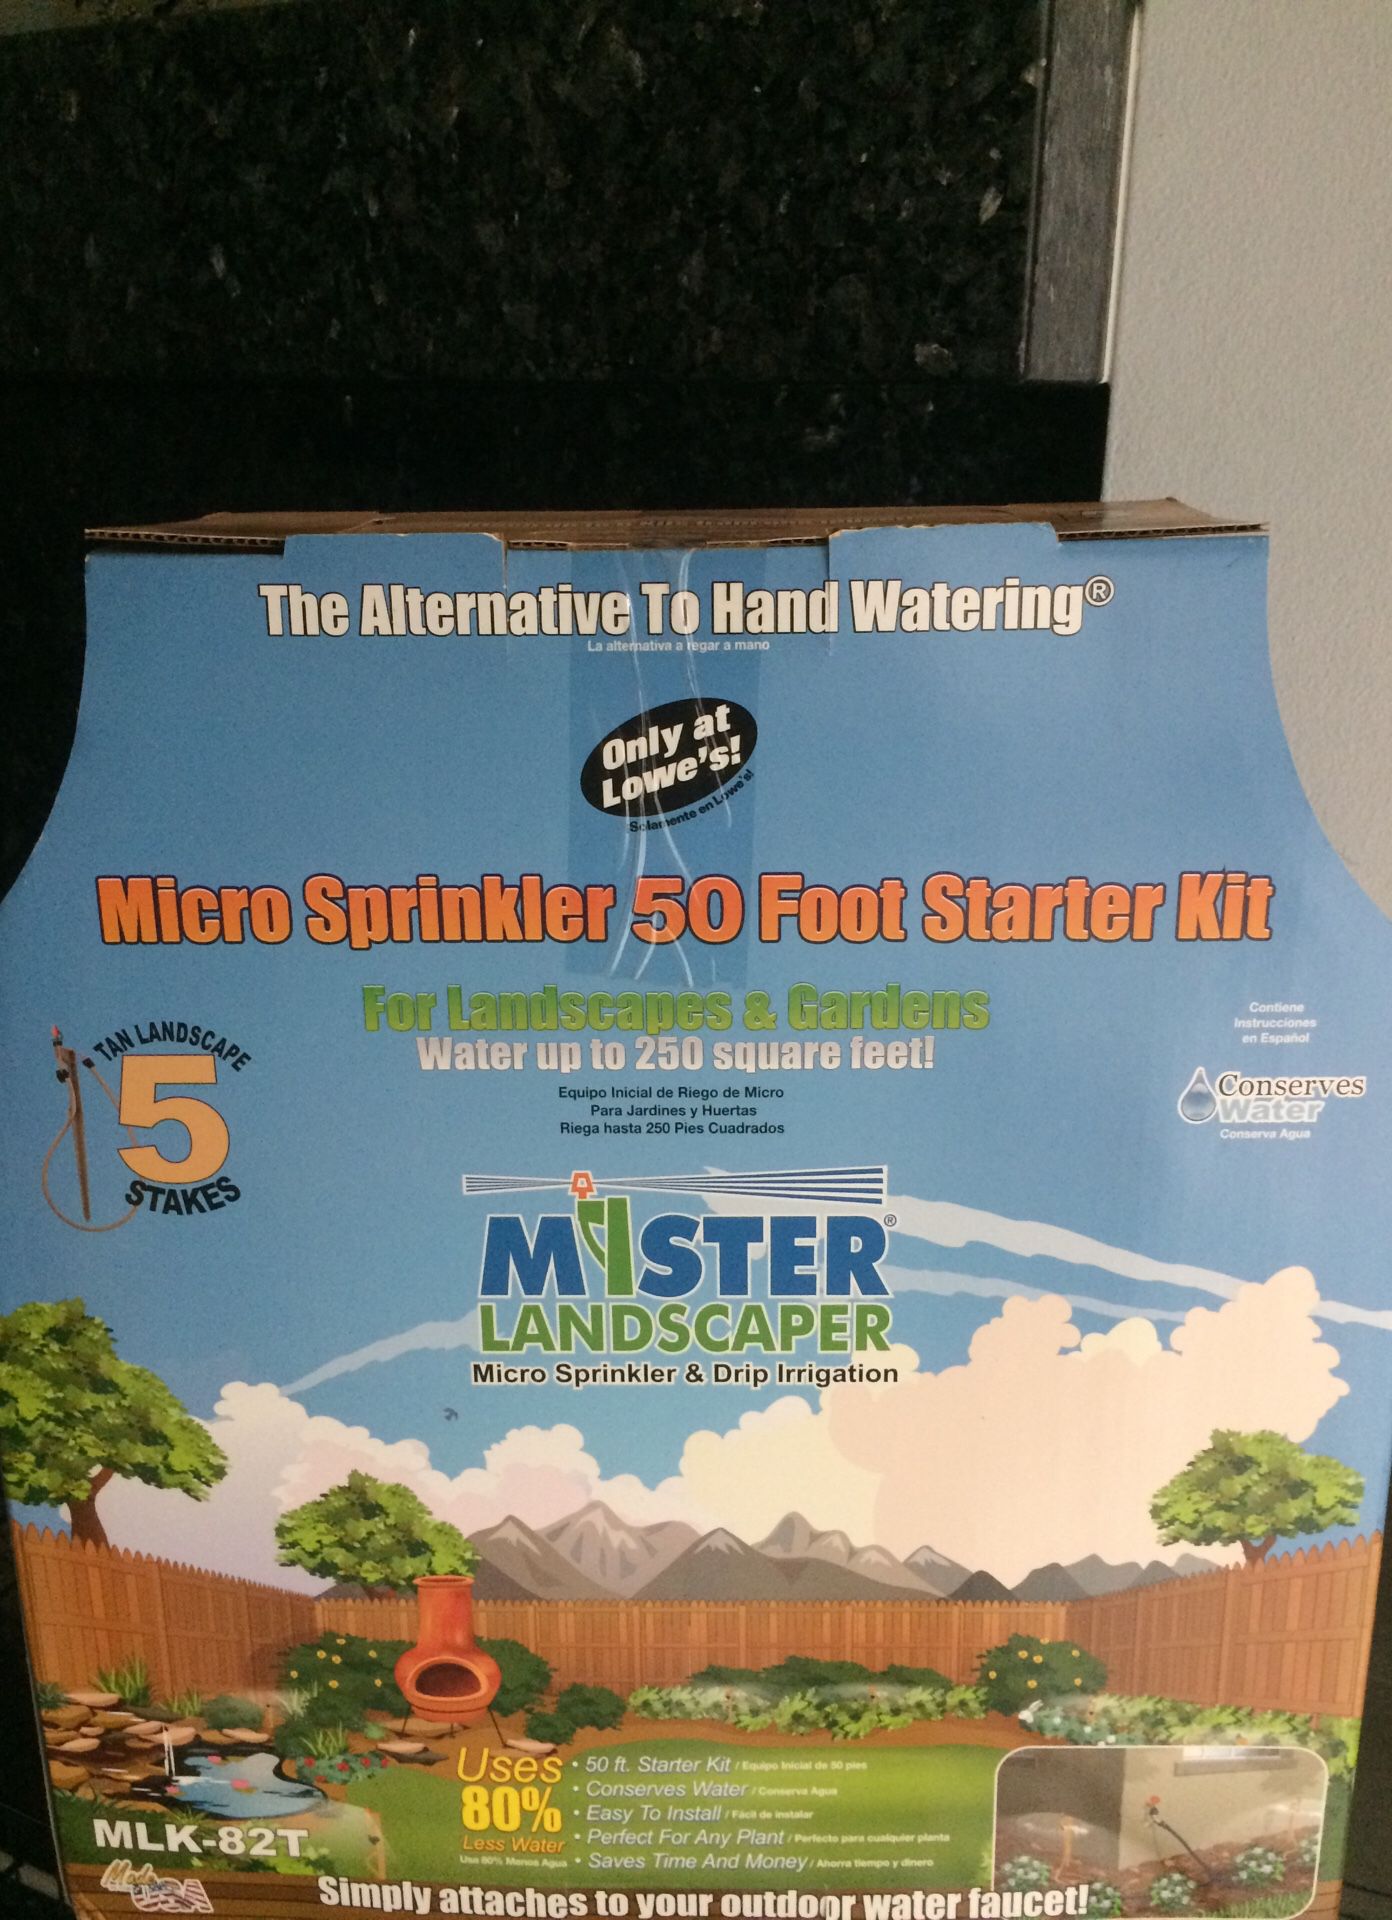 Micro sprinkler 50 feet starter kit. Electronic water timer with easy dial.